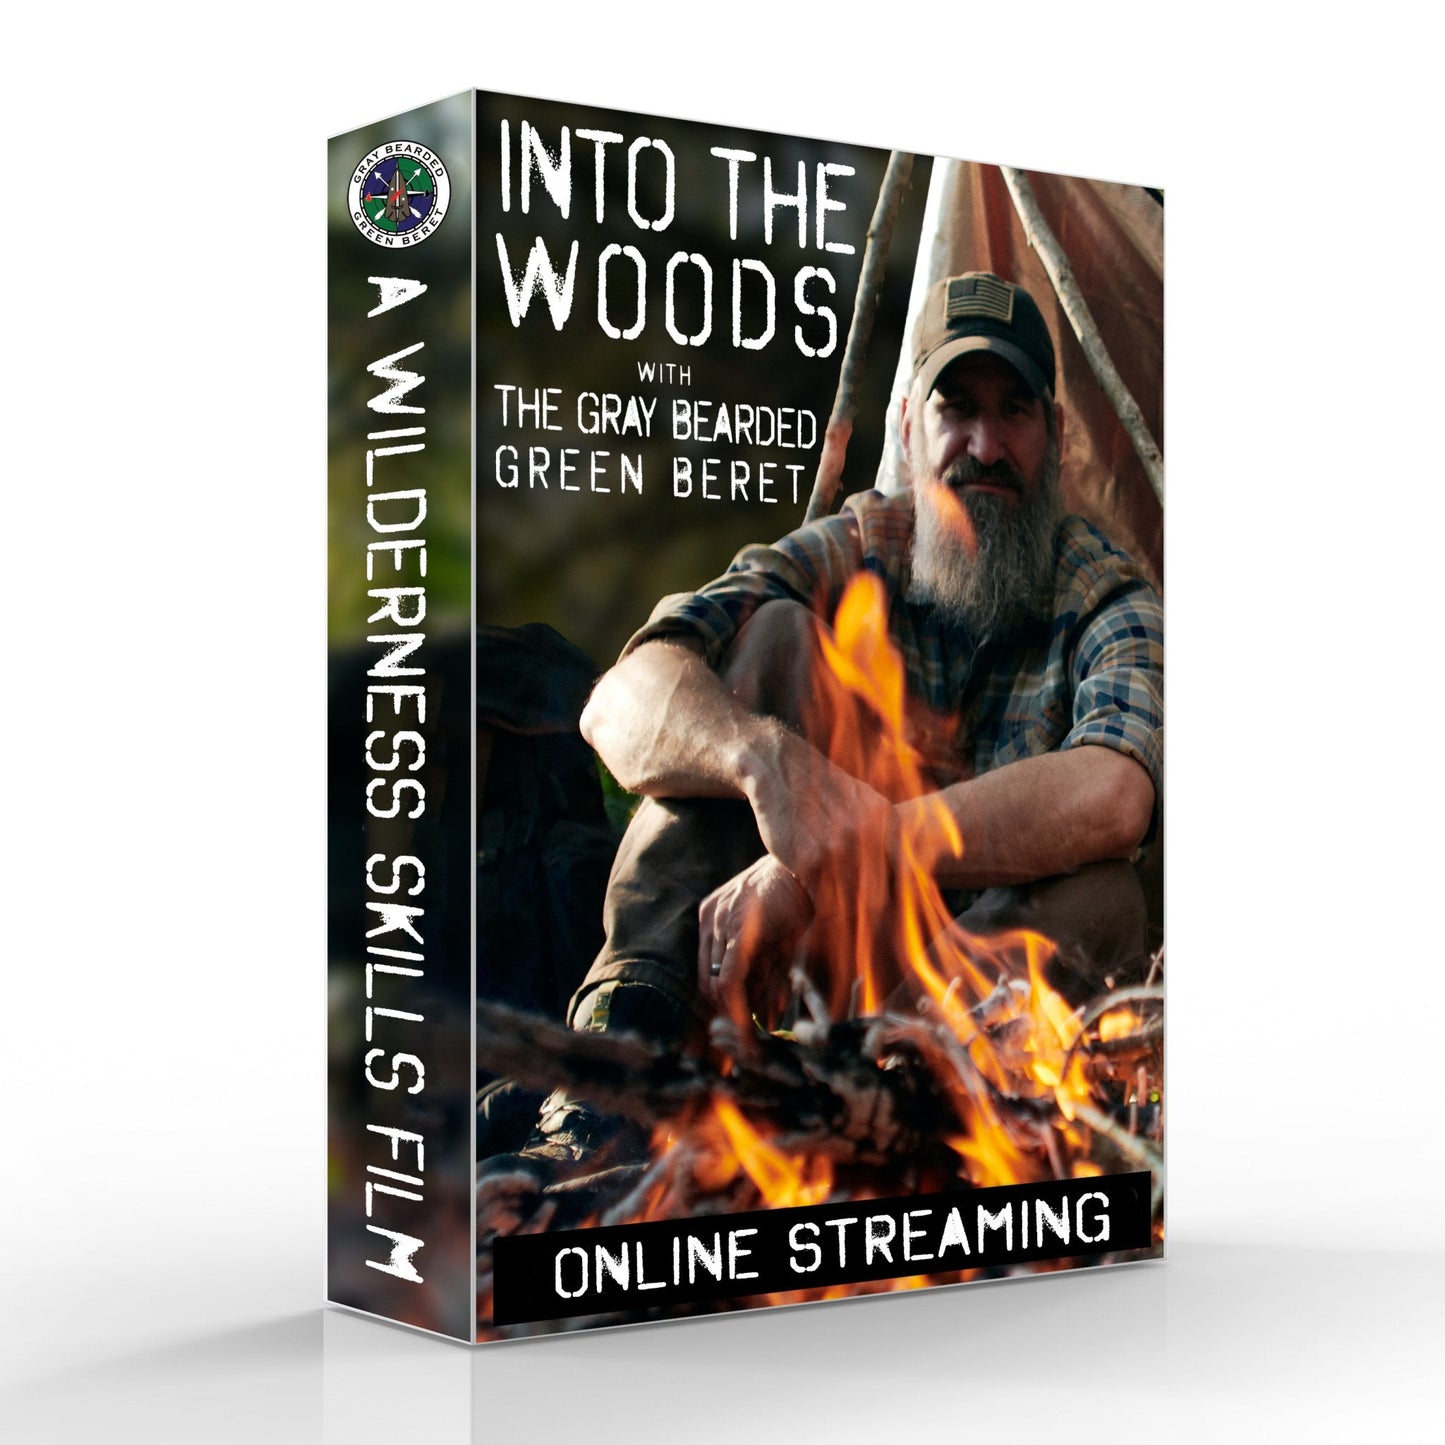 Into the Woods USB Limited Time Offer - Gray Bearded Green Beret